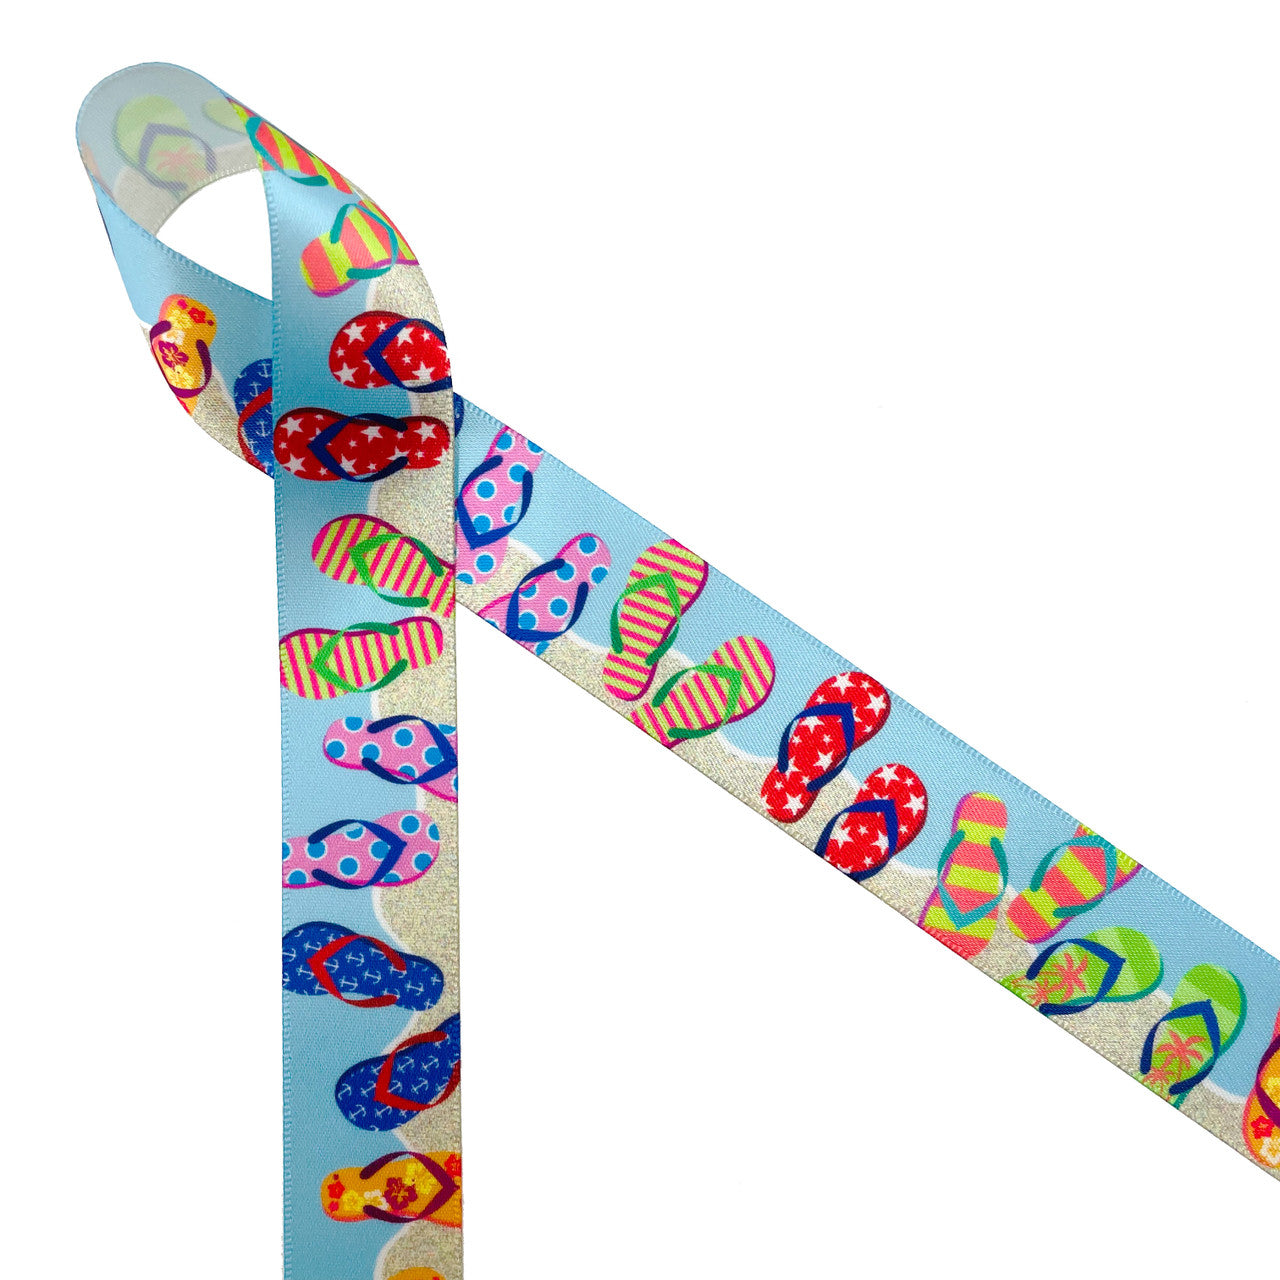 Flip Flop ribbon featuring colorful sandals with stripes, stars, florals and palm trees in red, yellow, orange. blue and green on a sandy background with blue skies printed on 7/8" white single face satin is such a fun Summer ribbon. This beautiful ribbon is perfect for beach parties, pool parties, Summer themed parties, gift wrap, gift baskets, party decor and party favors. Use this ribbon for crafts, sewing, quilting and hair bow ribbons too! All our ribbons are designed and printed in the USA